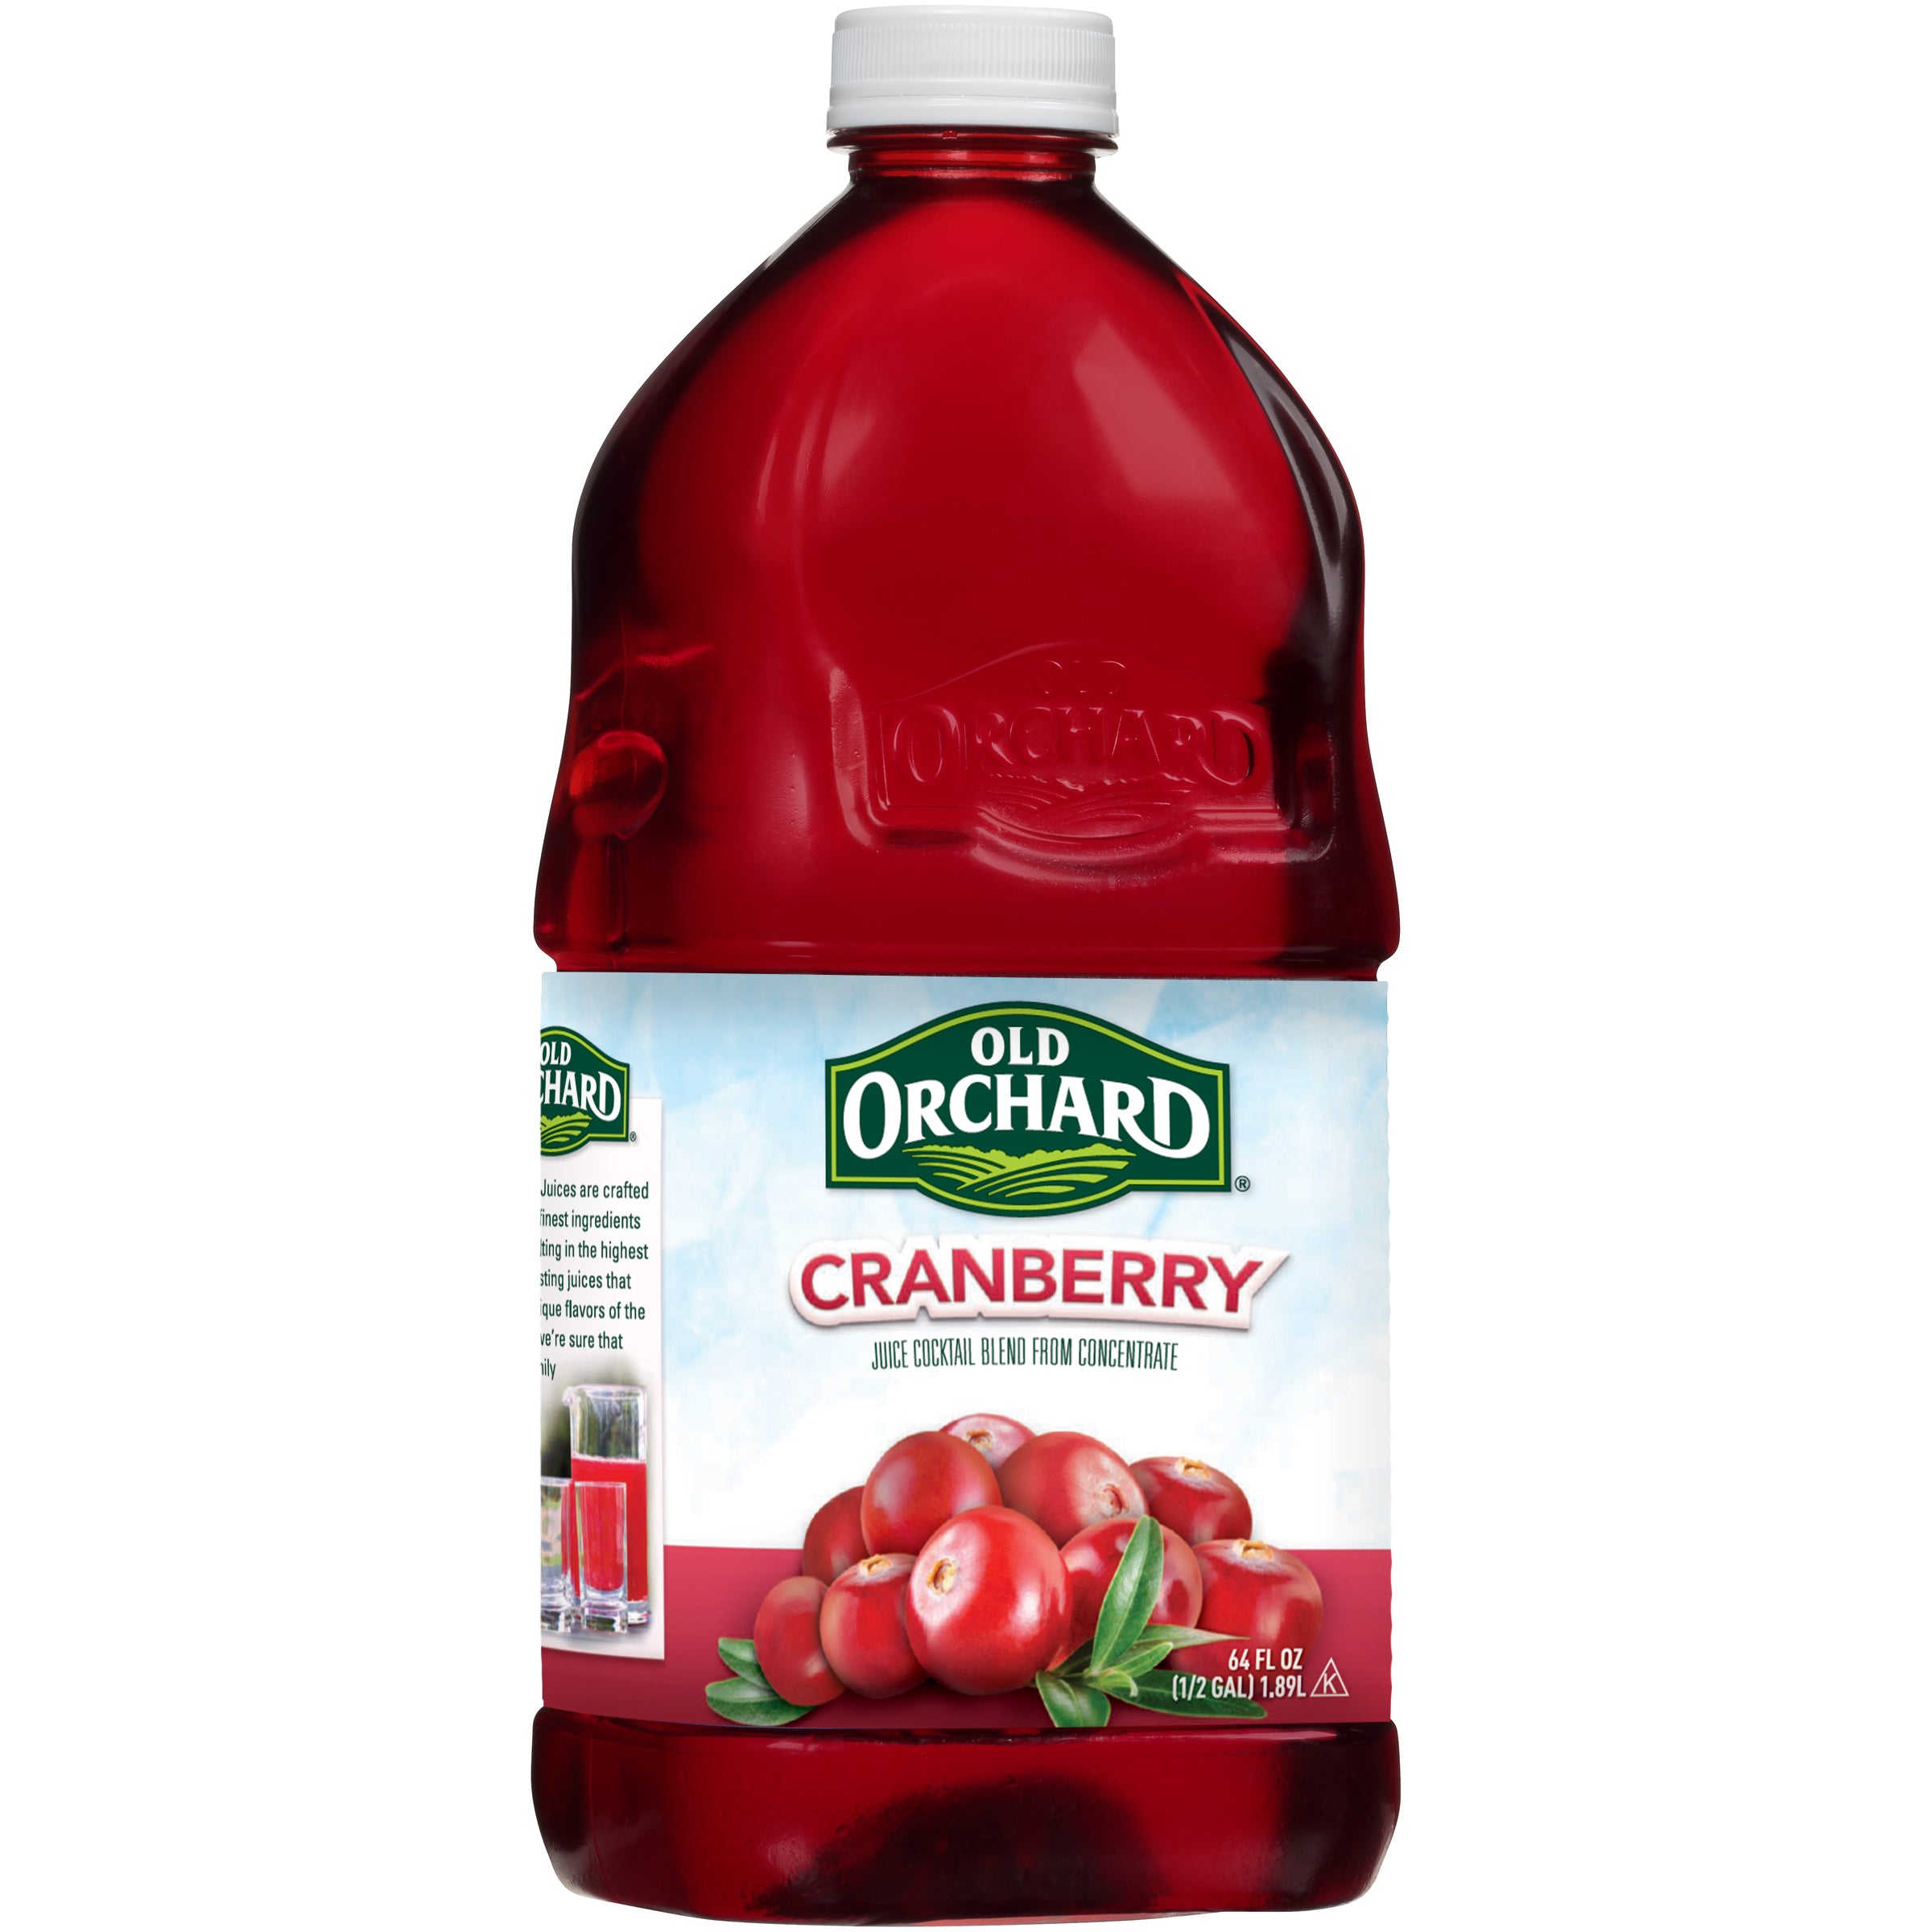 Old Orchard Cranberry Juice Cocktail (64 oz.)